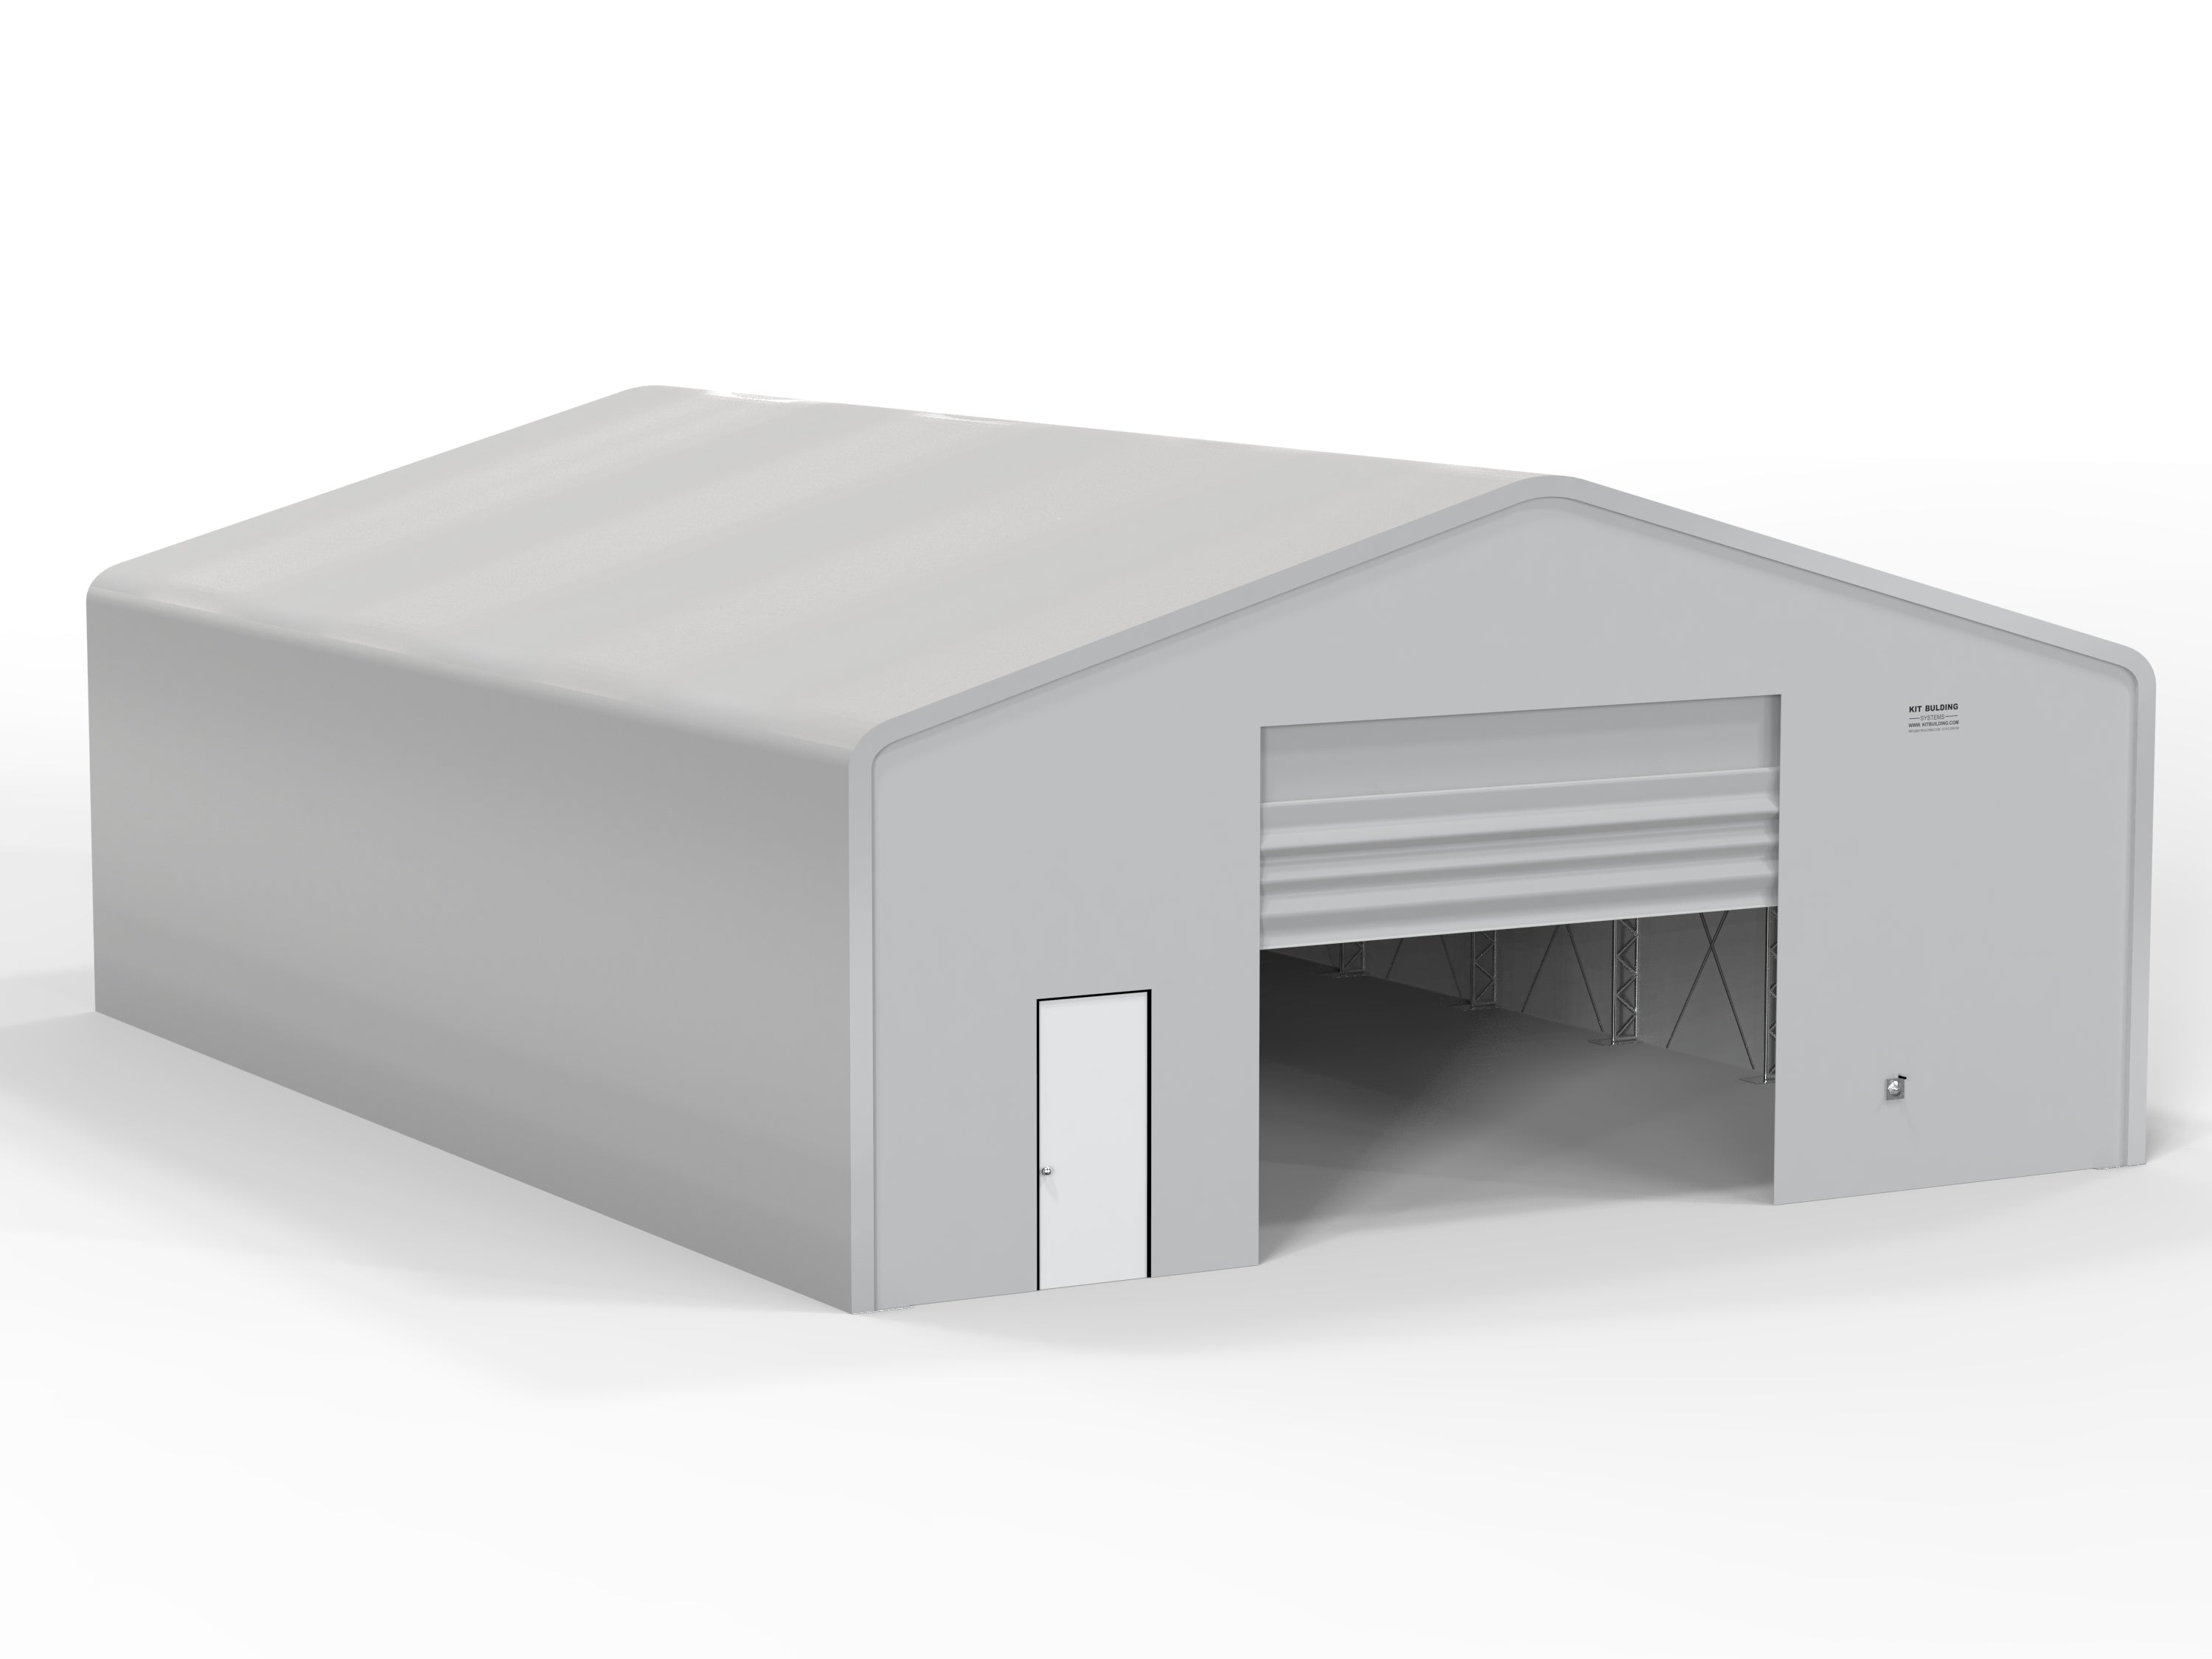 Double Truss PVC temporary storage building - Grey - Winch Operated PVC shutter